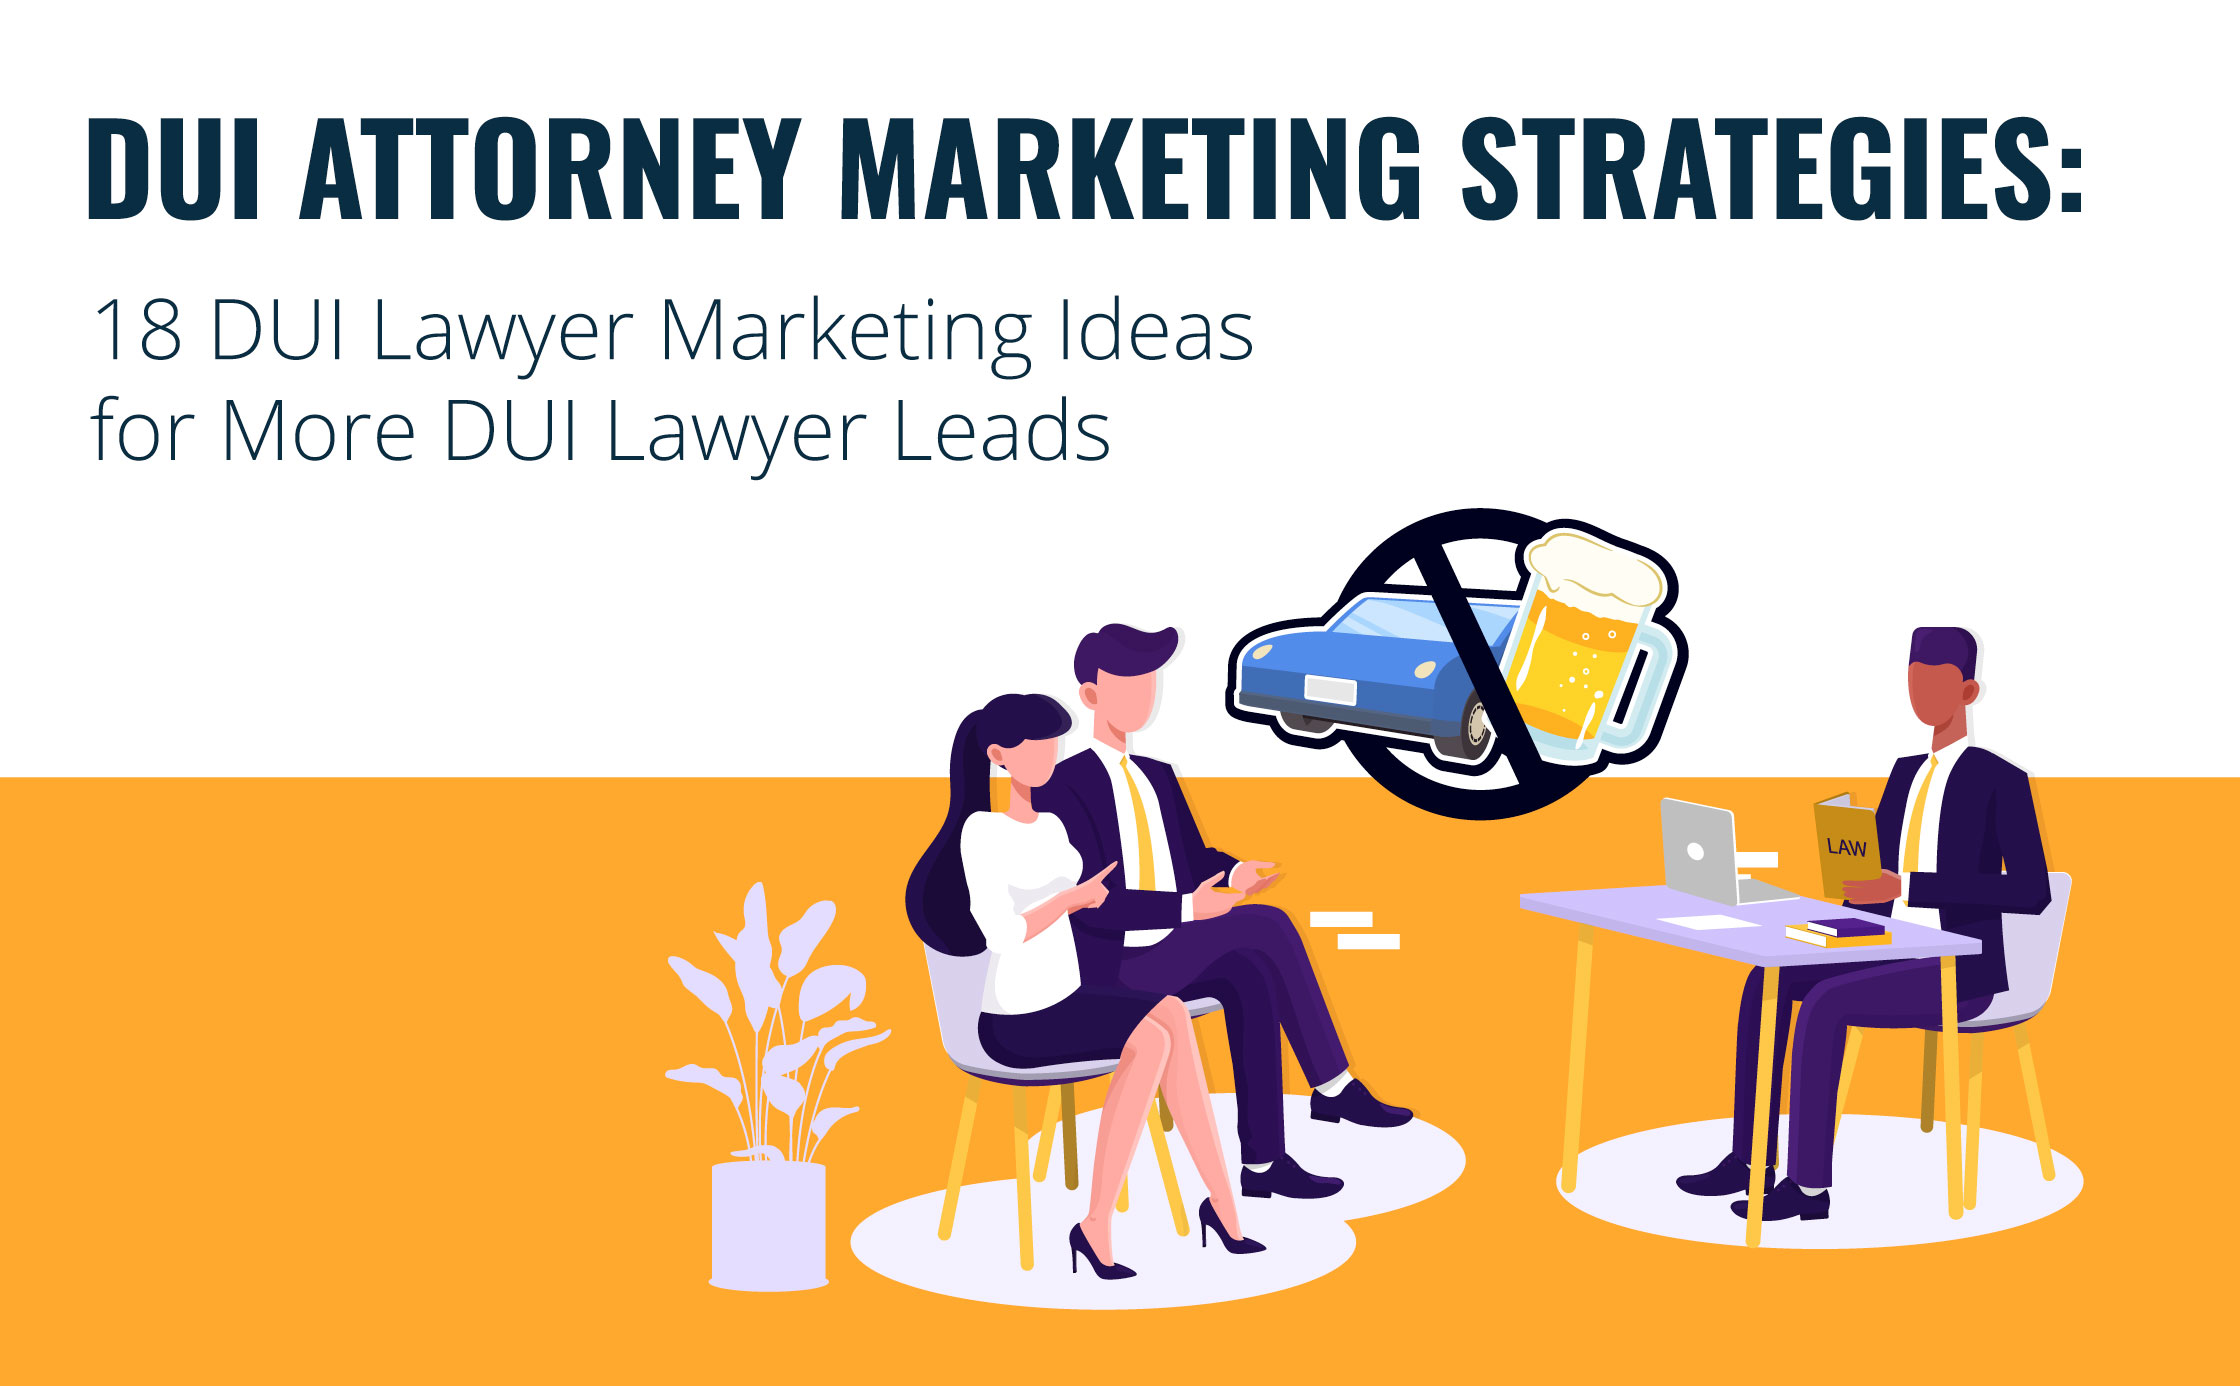 18 DUI Lawyer Marketing Ideas for More DUI Lawyer Leads